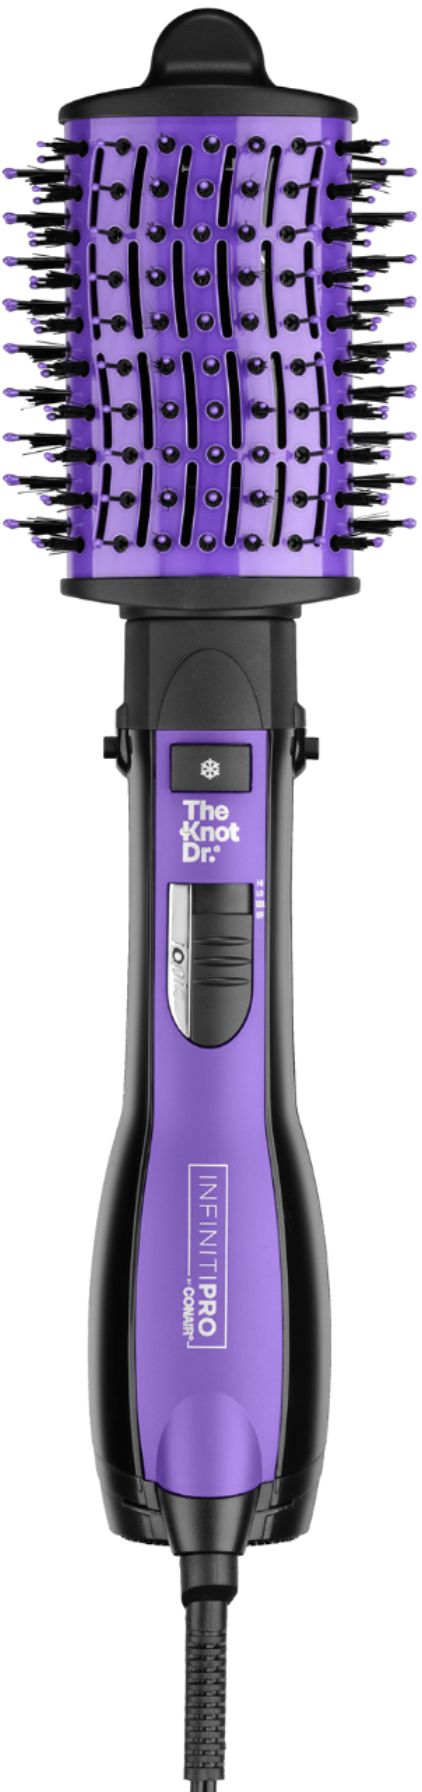 Conair - All-in-One Dryer Brush - Purple And Black_18